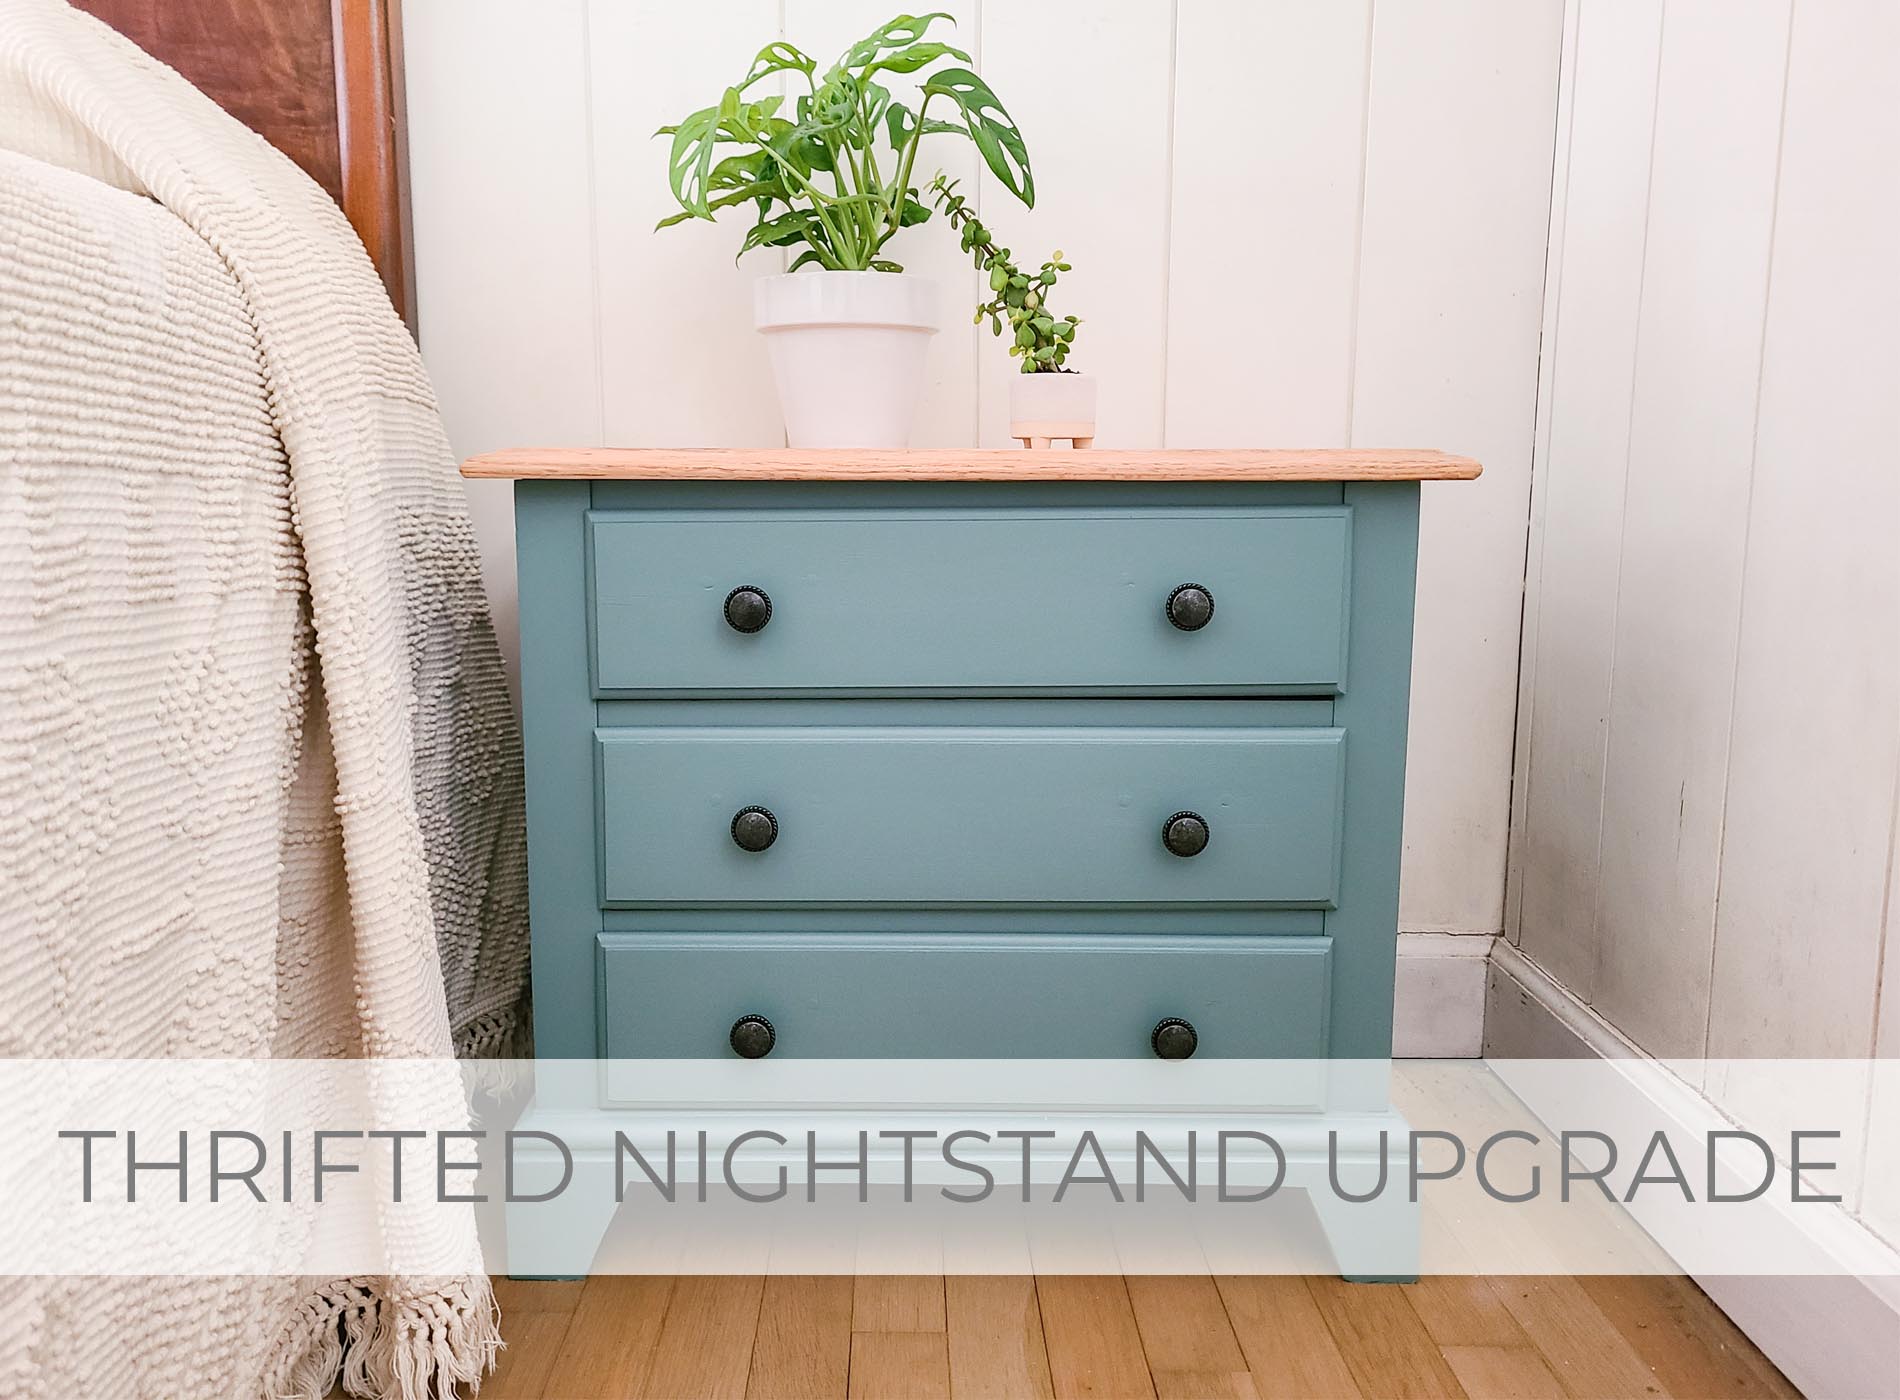 Showcase of Thrifted Nightstand Upgrade by Larissa of Prodigal Pieces | prodigalpieces.com #prodigalpieces